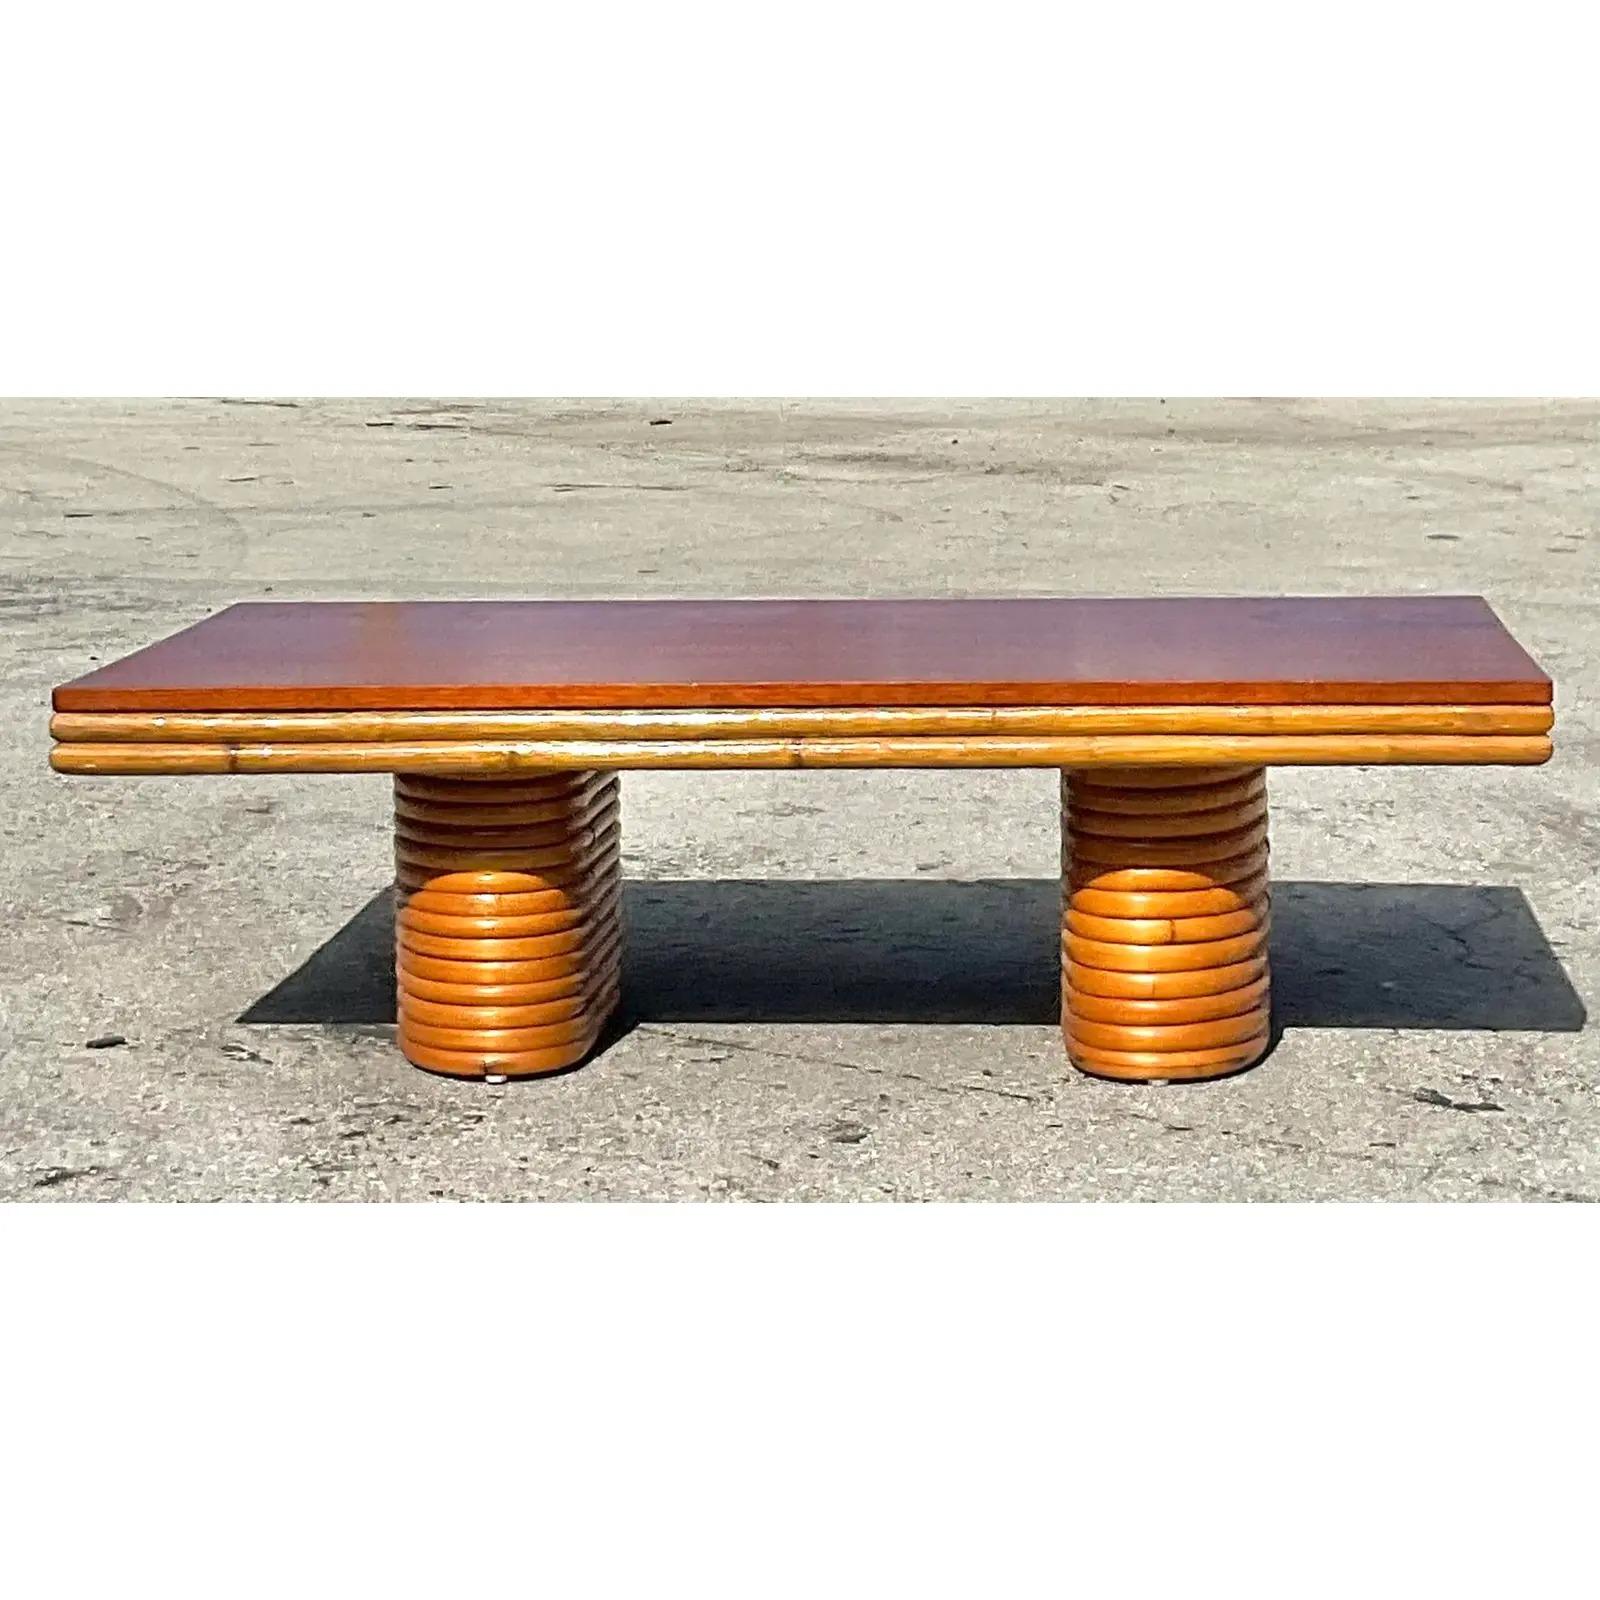 Incredible vintage coastal bent rattan coffee table. Done in the manner of Paul Frankl. Beautiful wood grain detail on top with rattan pedestals below. Acquired from a Palm Beach estate.